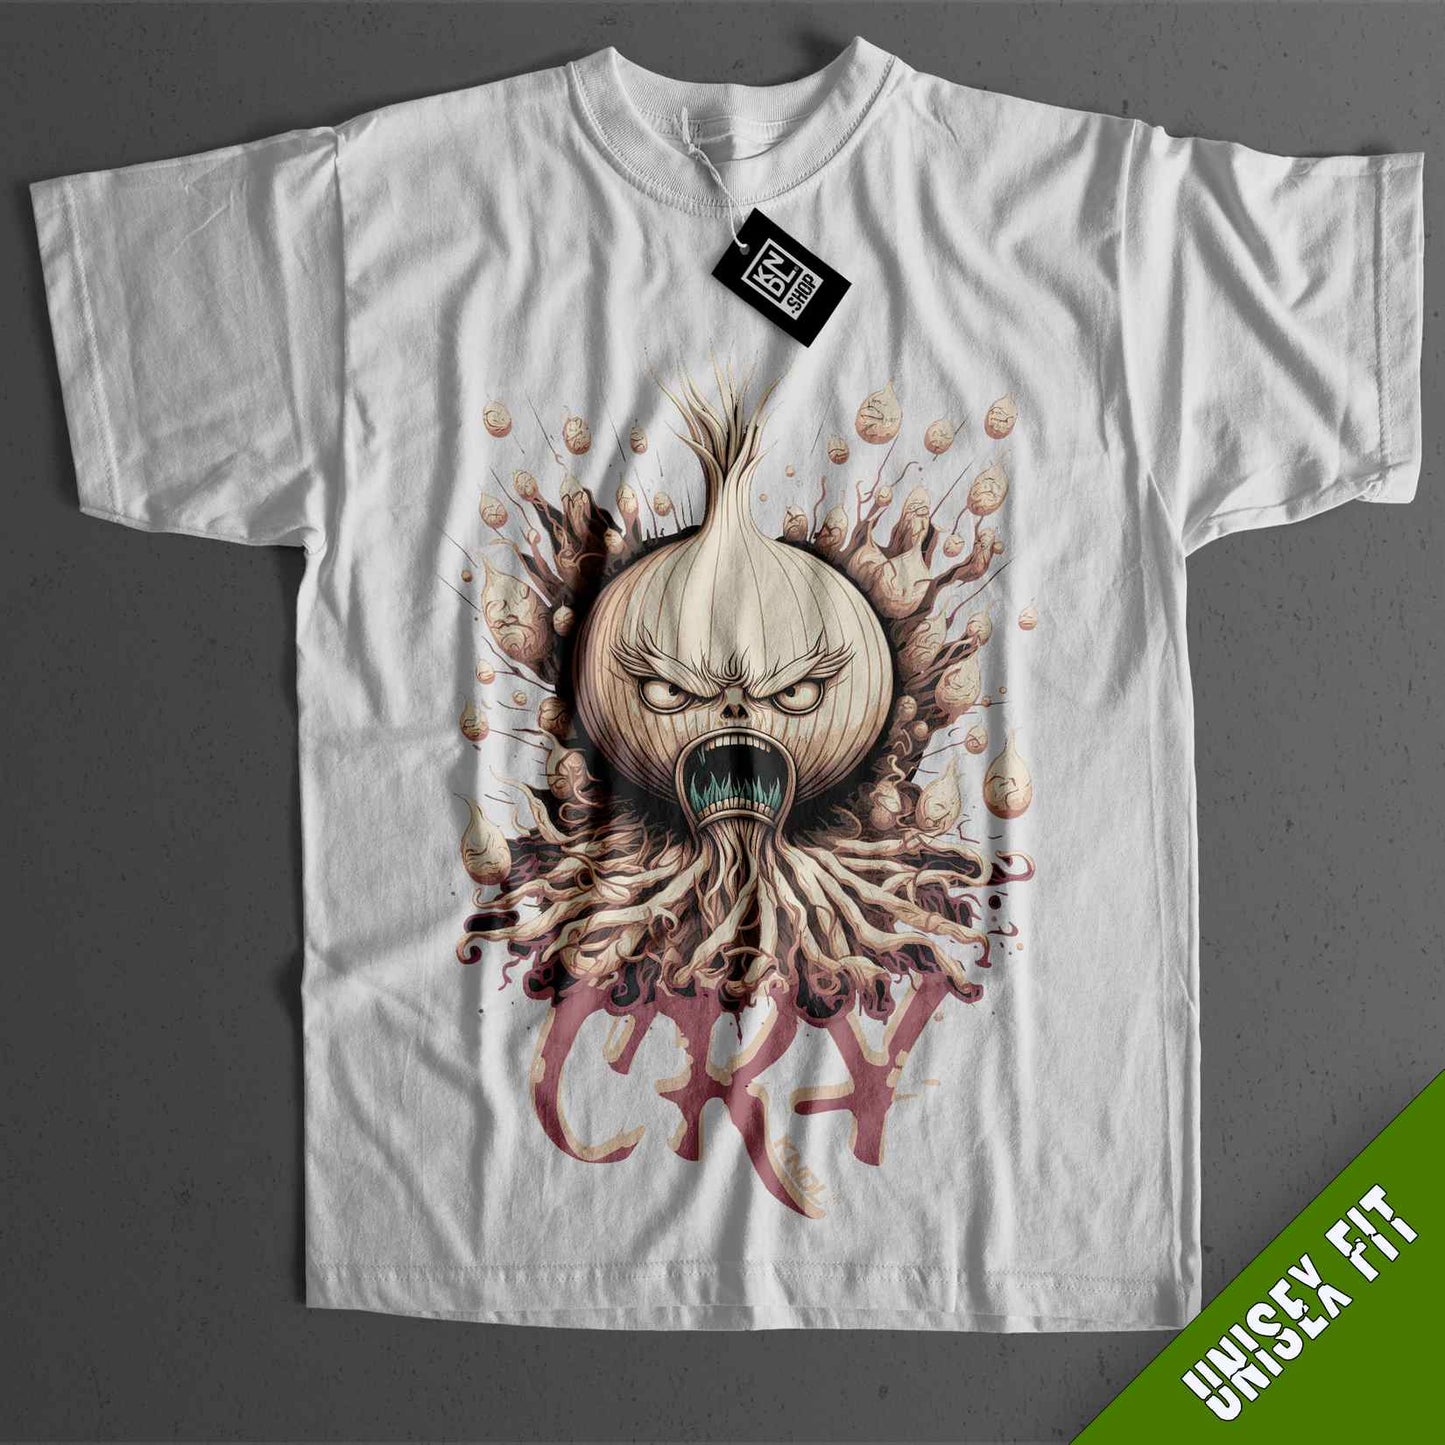 a white t - shirt with an image of an onion on it